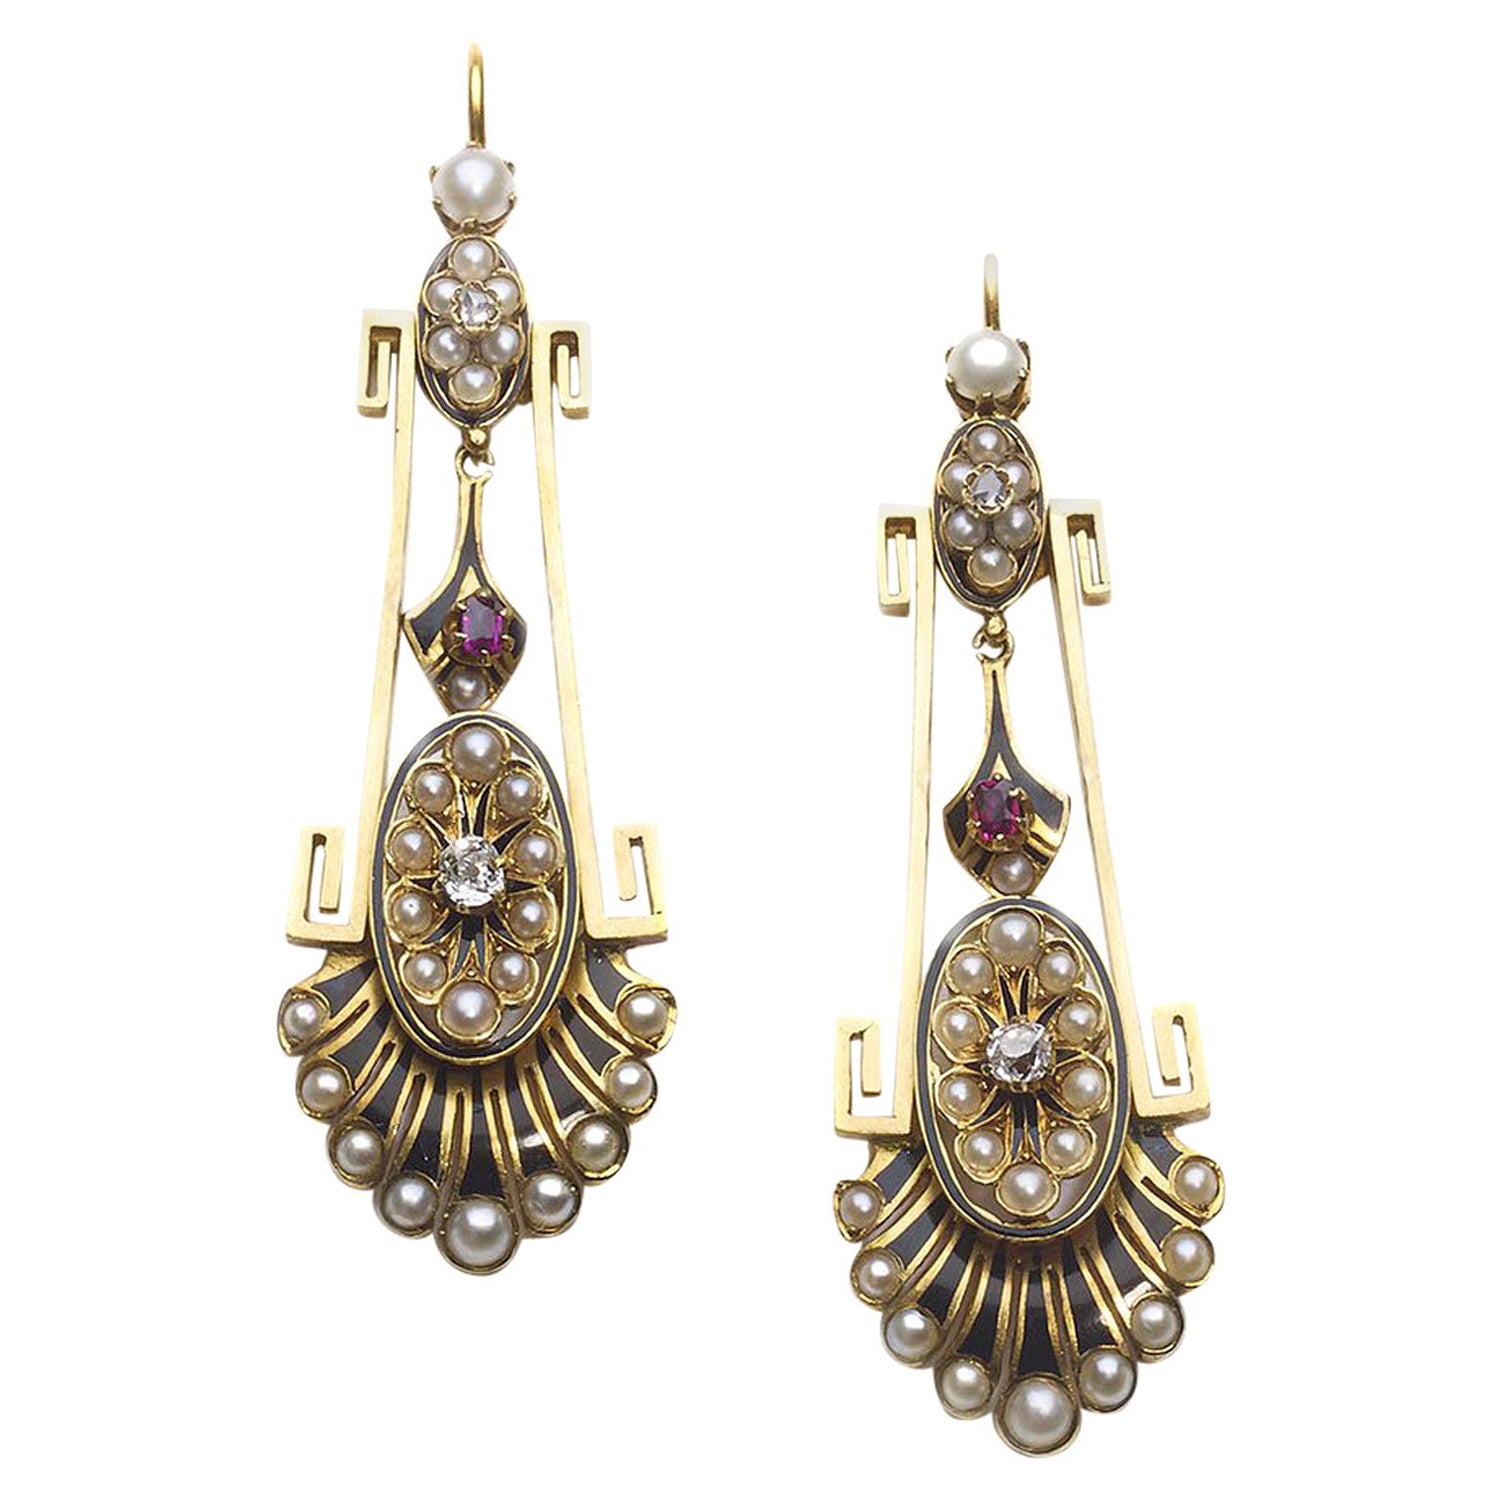 Victorian Aesthetic Movement Gold, Pearl, Diamond, Enamel and Ruby Earrings